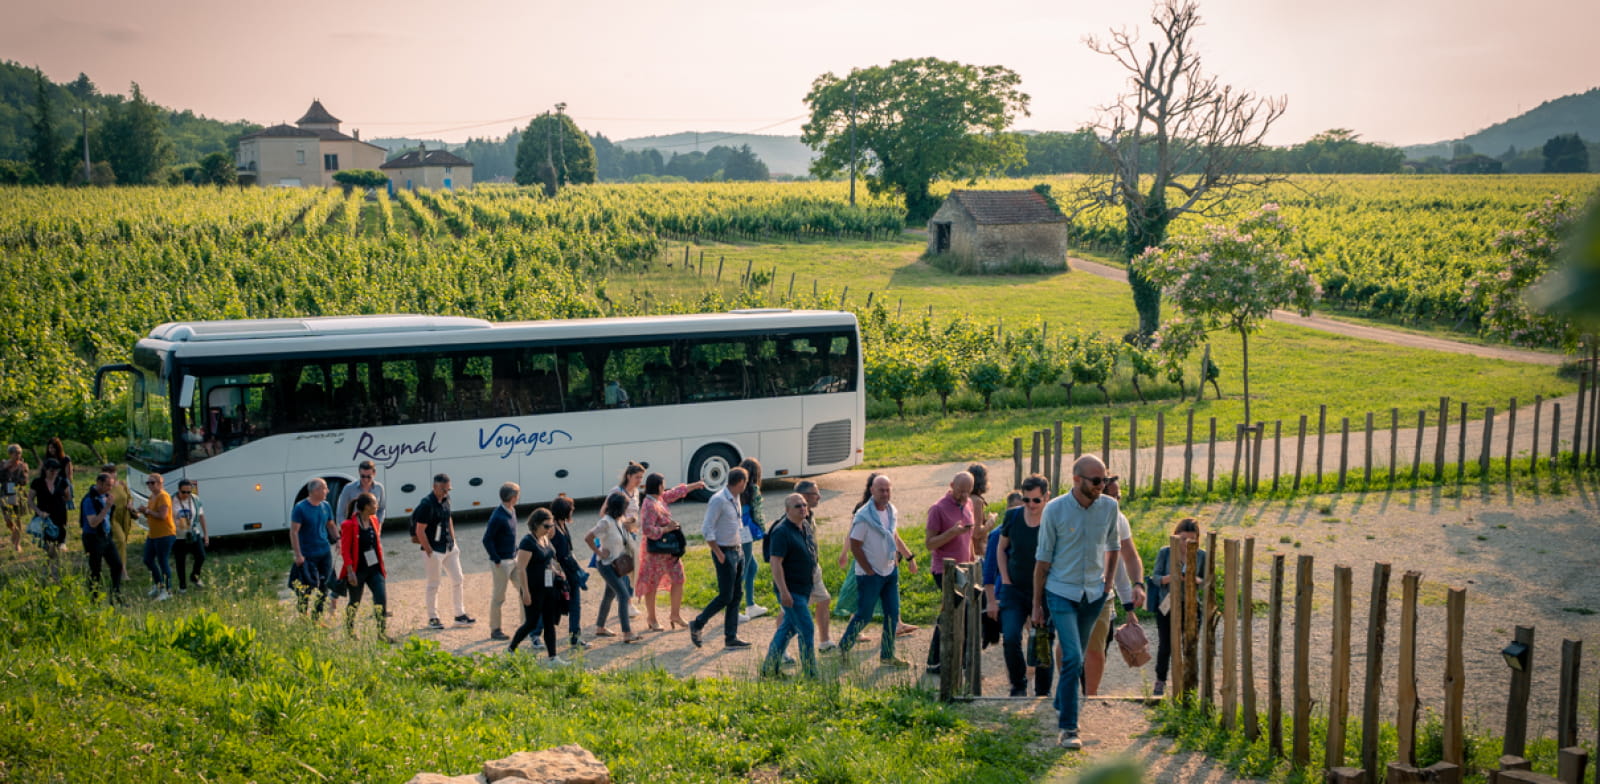 Winery groups - Business tourism